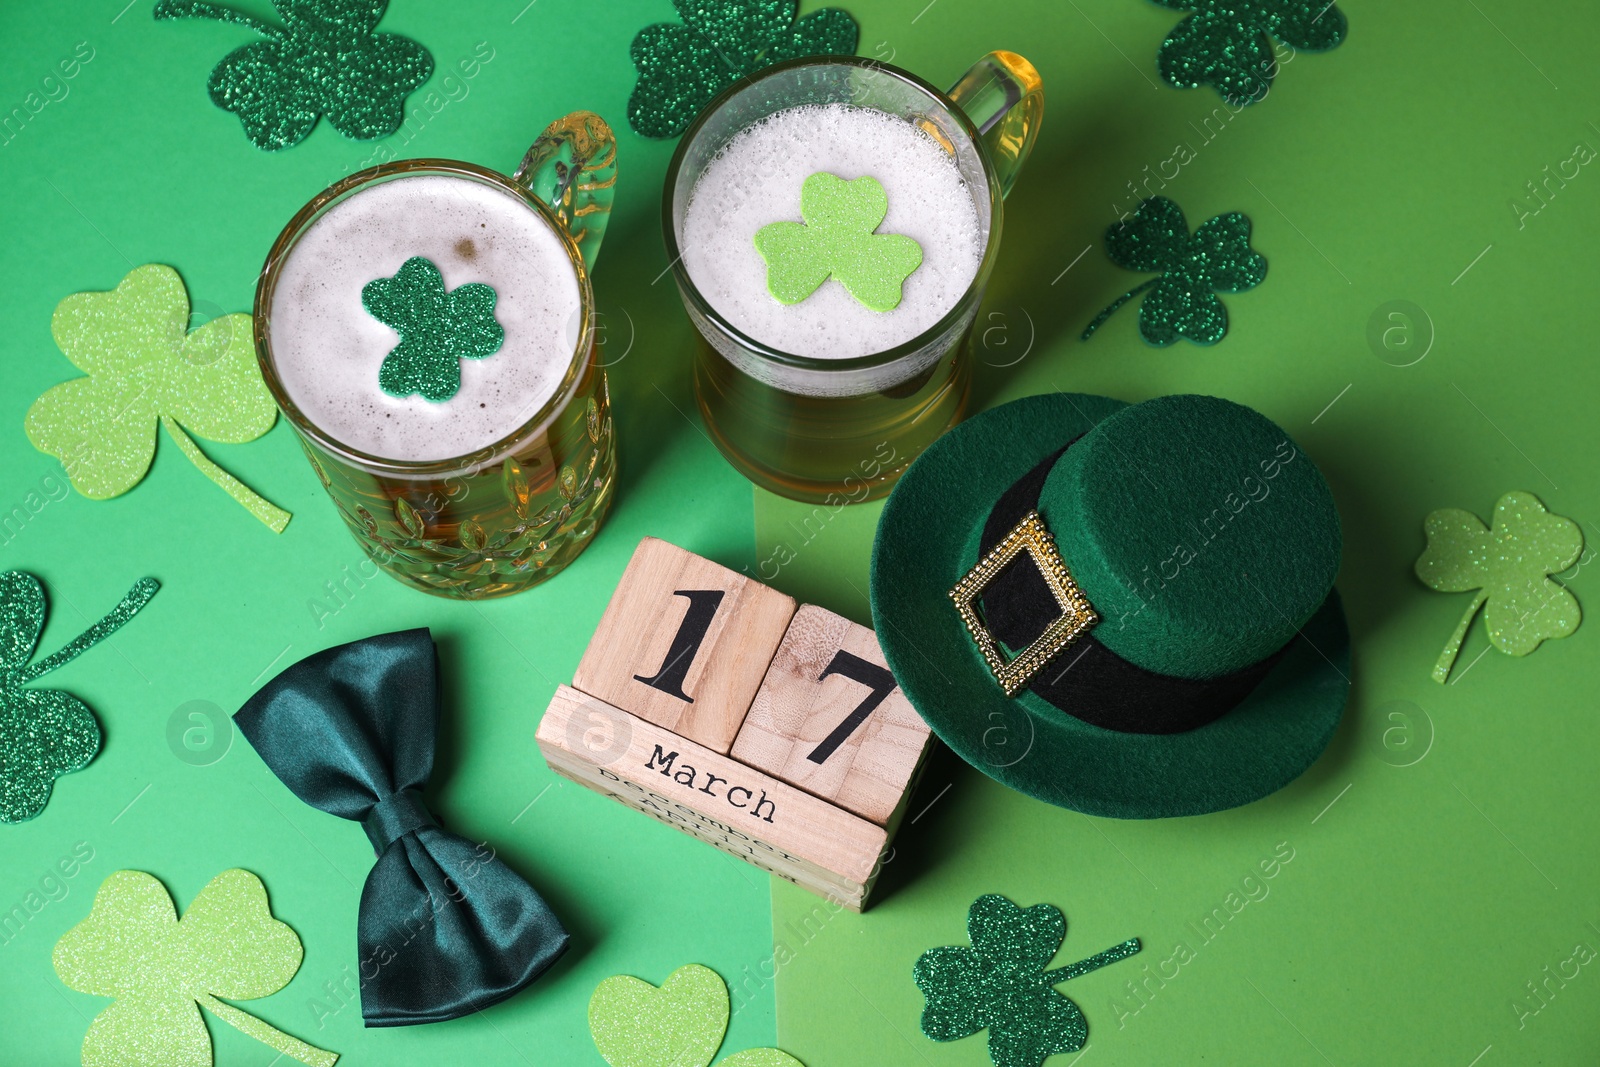 Photo of St. Patrick's day party on March 17. Green beer, leprechaun hat, bowtie, wooden block calendar and decorative clover leaves on green background, above view